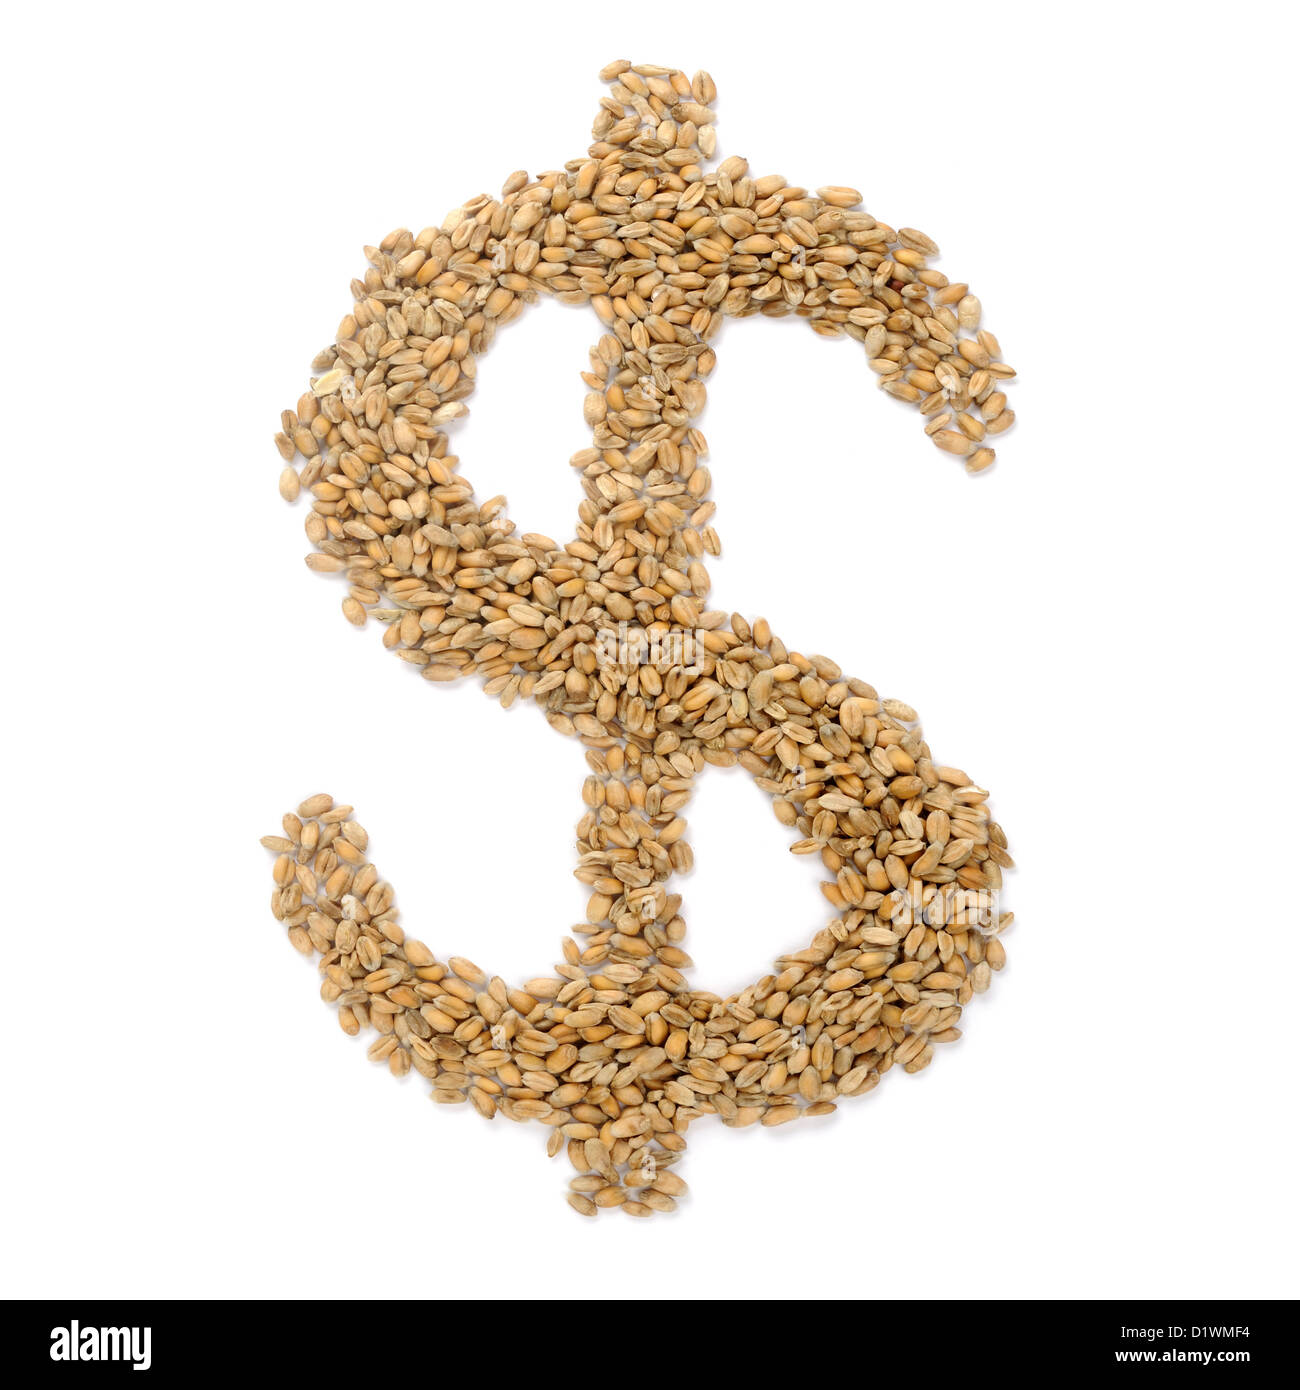 Wheat grains in shape of dollar sign Stock Photo